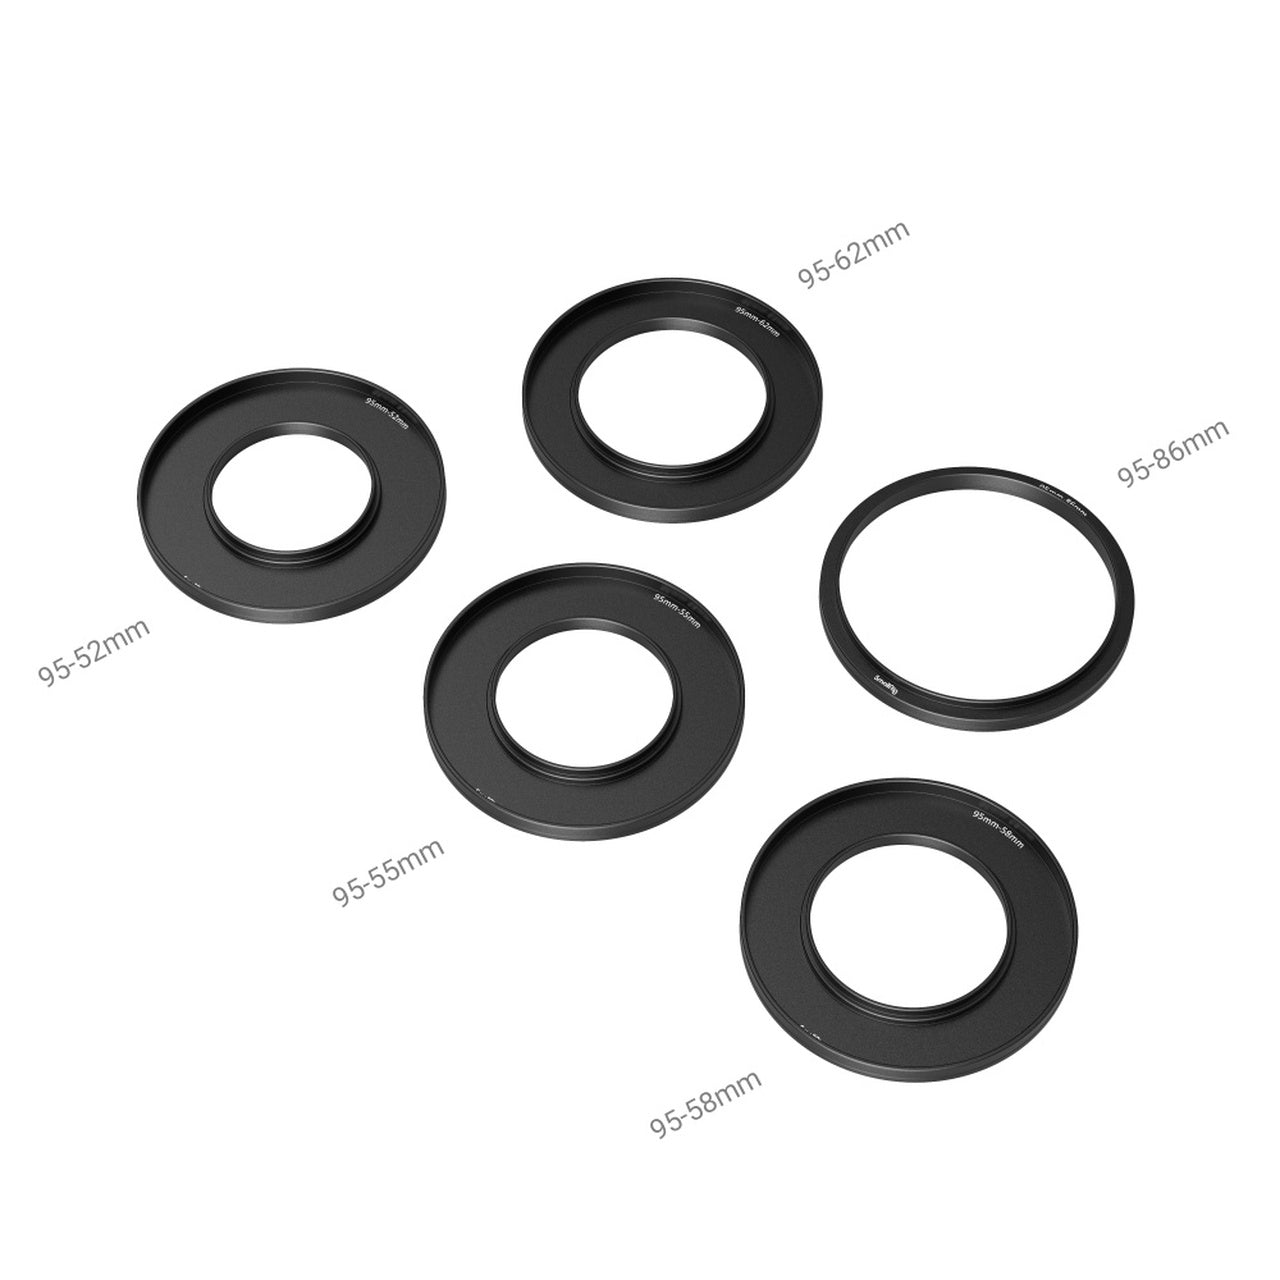 SmallRig Adapter Rings Kit for Mini Matte Box CPL ND Round Lens Filters with Aluminum Construction 3383